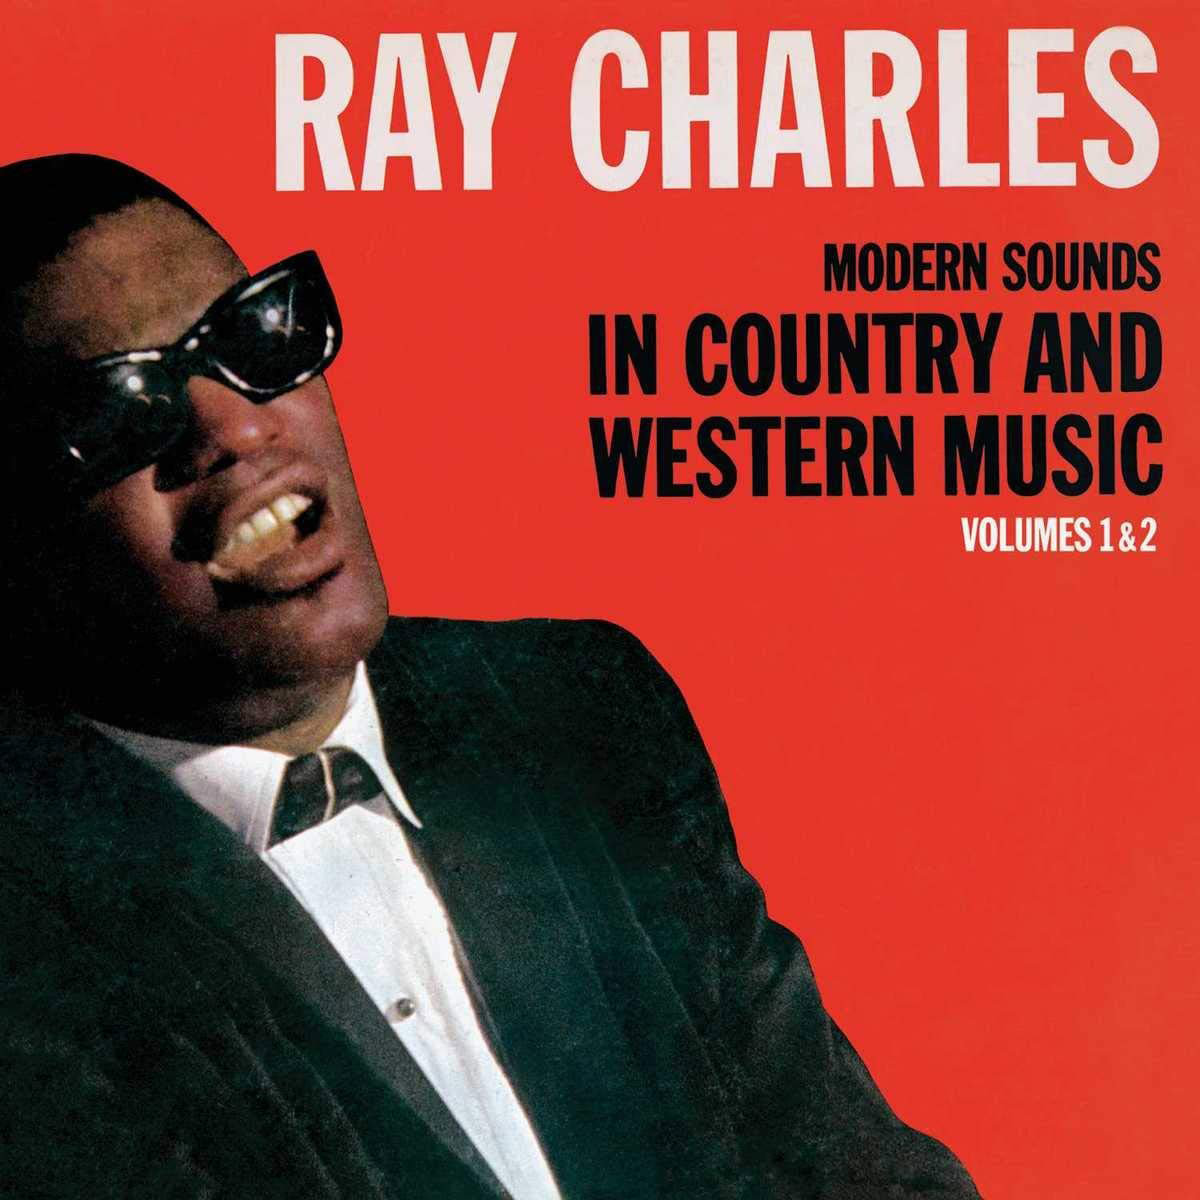 Ray Charles, Modern Sounds in Country and Western